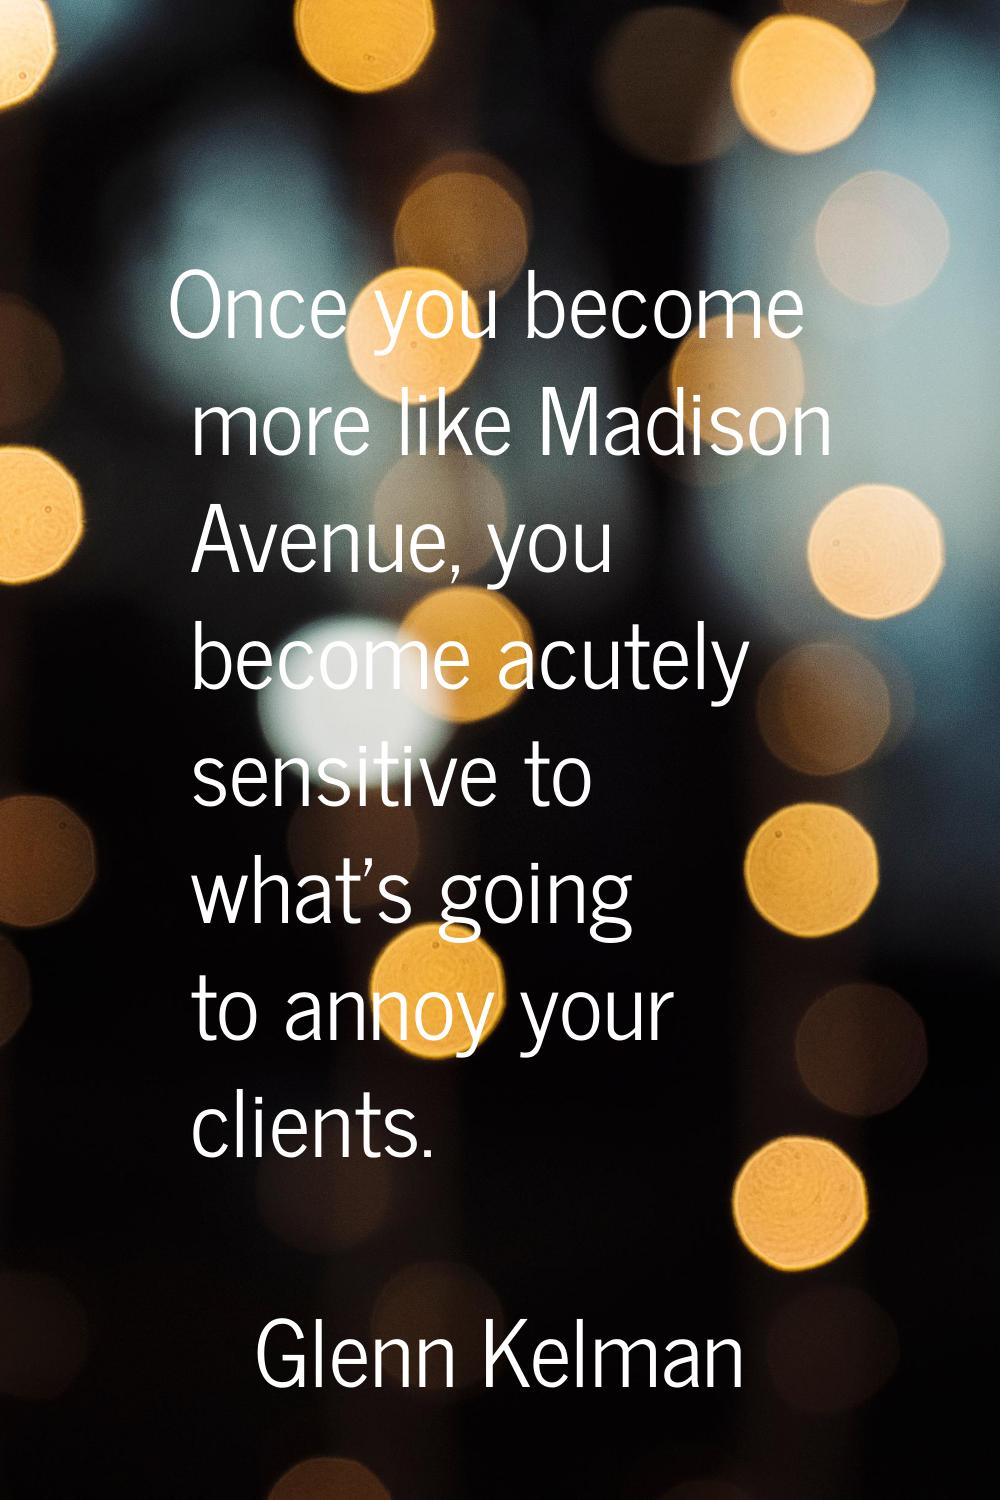 Once you become more like Madison Avenue, you become acutely sensitive to what's going to annoy you